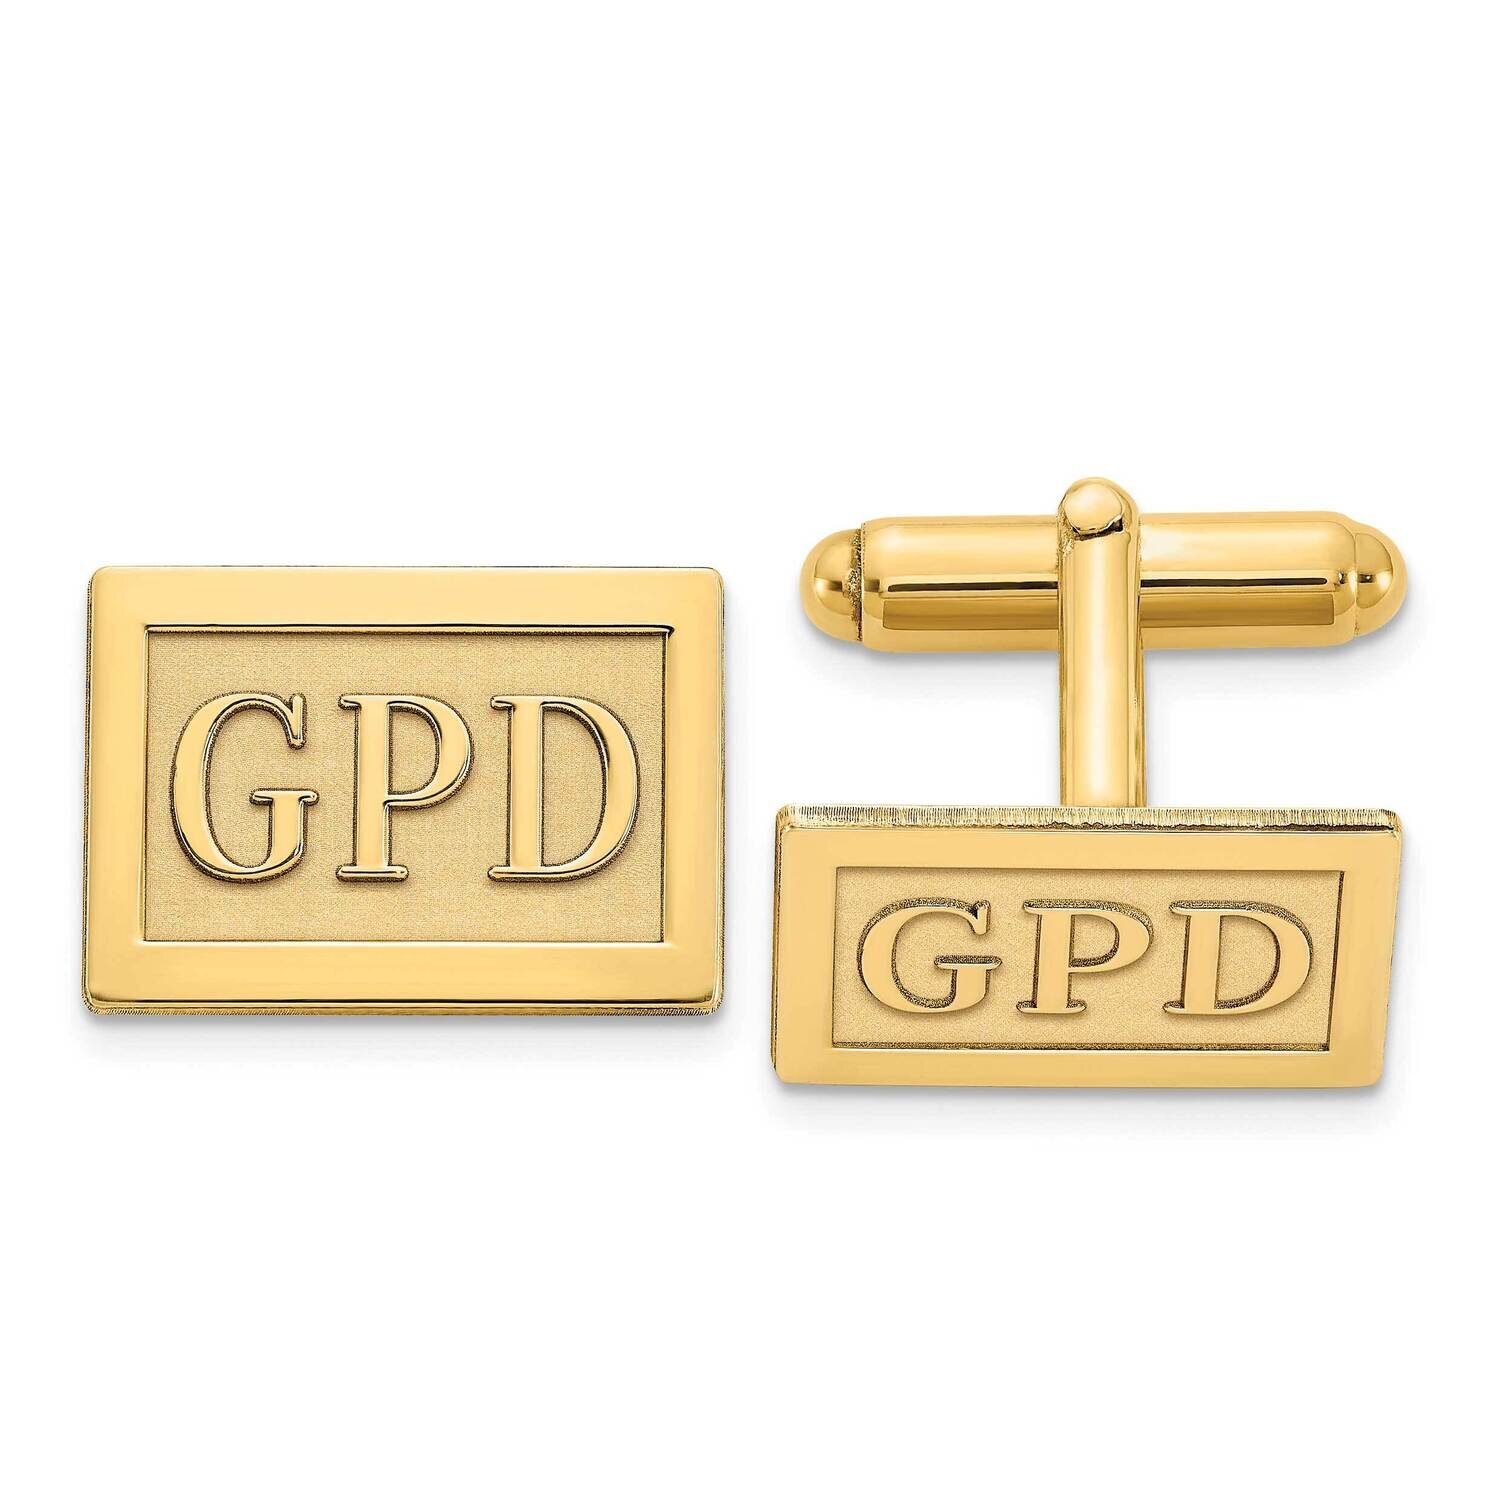 Rectangle Raised Letters Monogram Cufflinks Gold-plated Sterling Silver XNA614GP